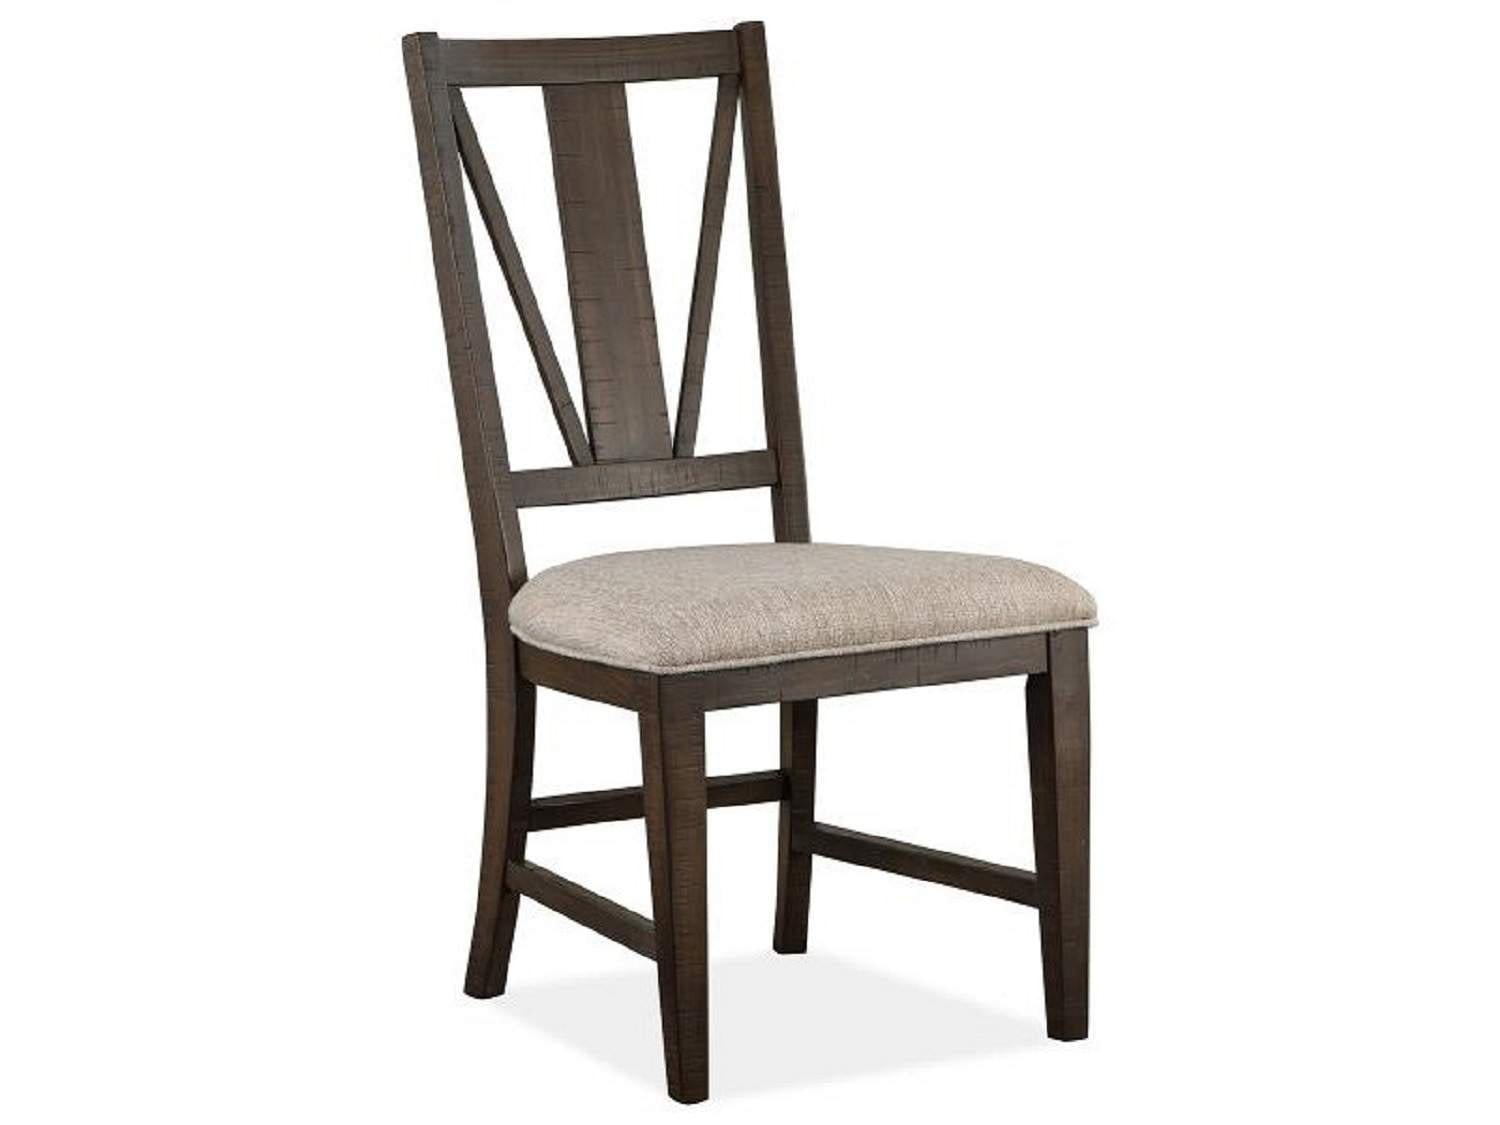 LENORA Dining Chair - Side